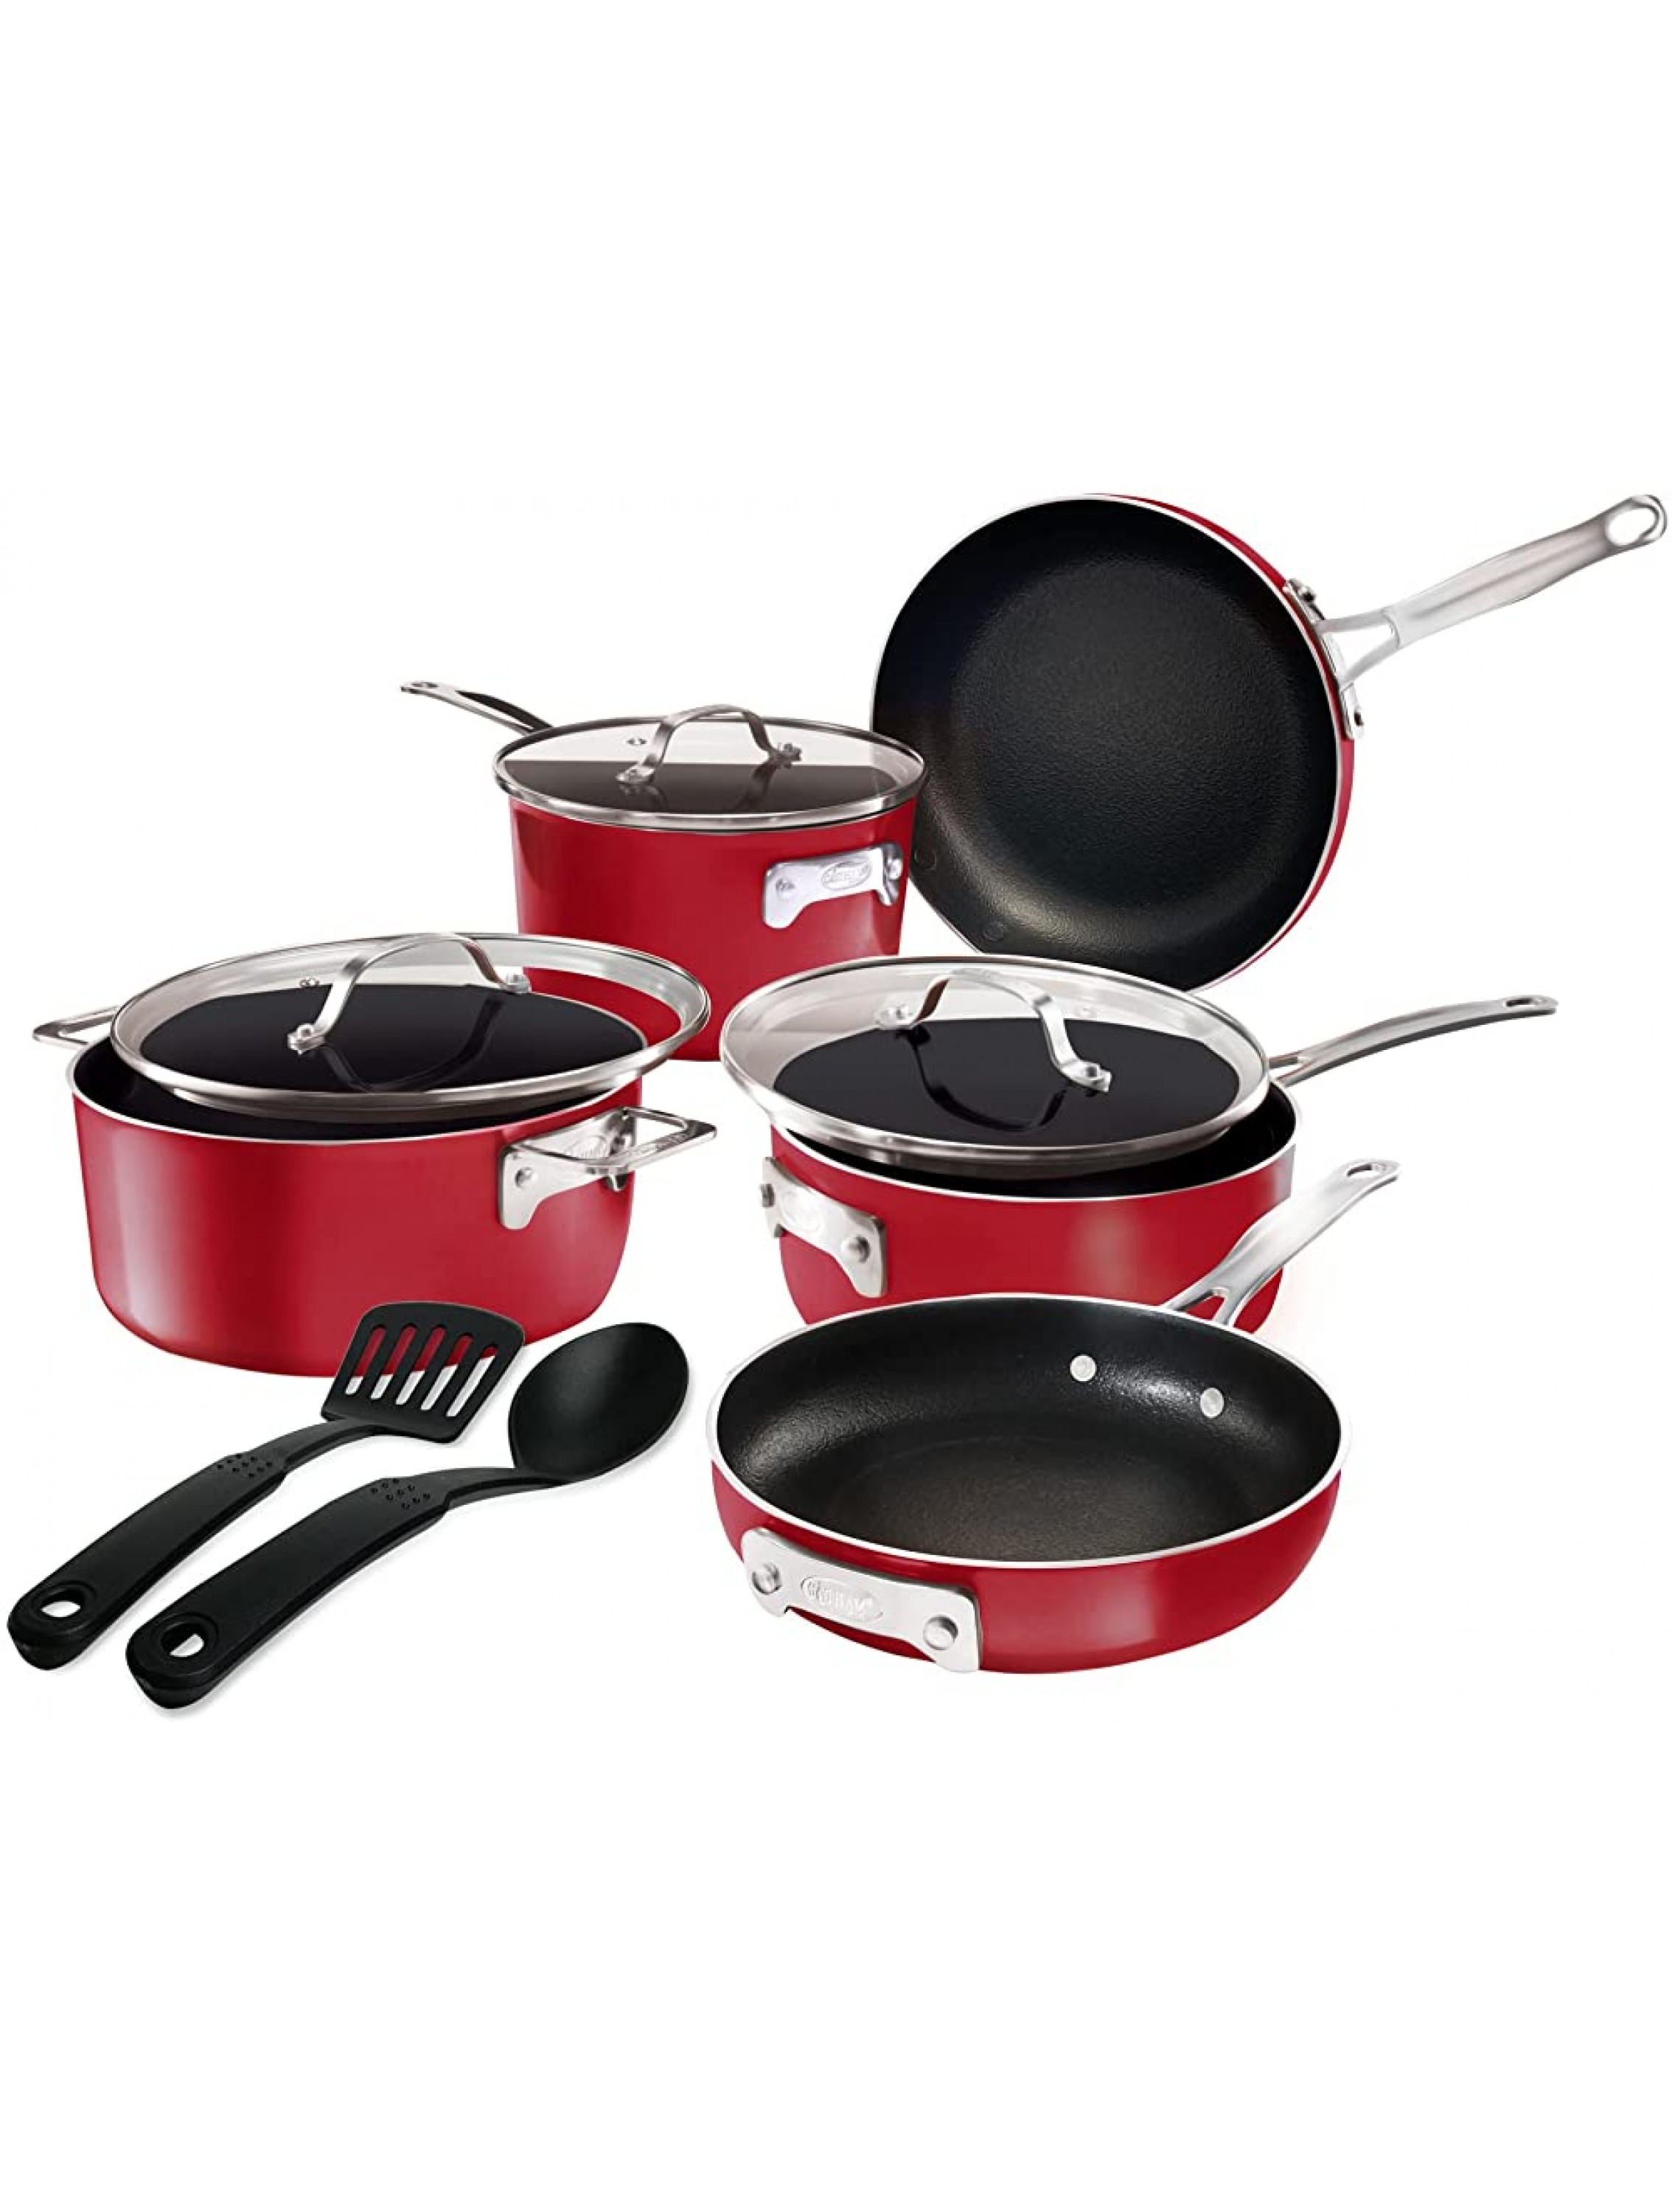 Gotham Steel STACKMASTER Pots Stackable 10 Piece Cookware Set Ultra Nonstick Cast Texture Coating Includes Fry Pans Red - BO46I3PI7